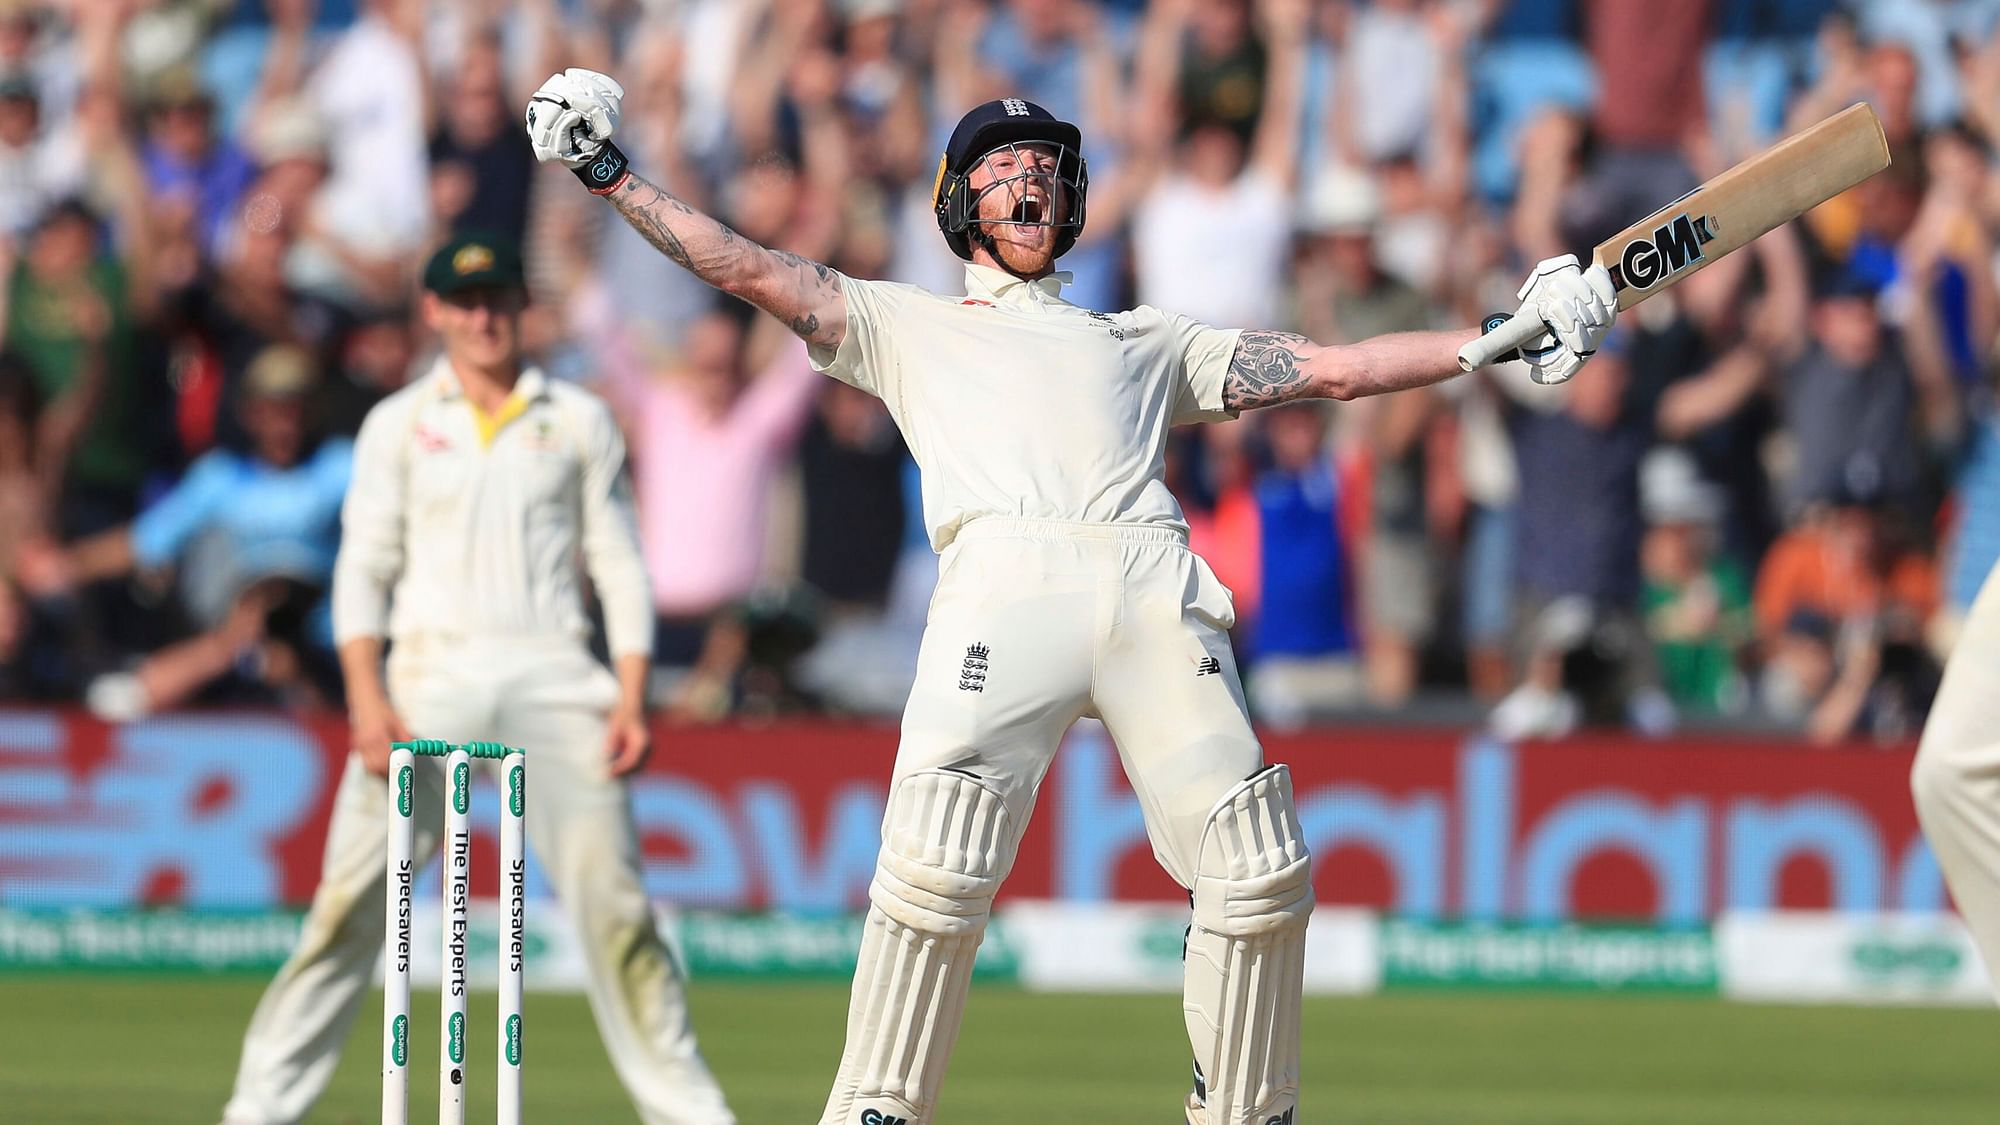 England all-rounder Ben Stokes and Australia’s Ellyse Perry were named the Leading Cricketers of 2019 by Wisden Almanack.